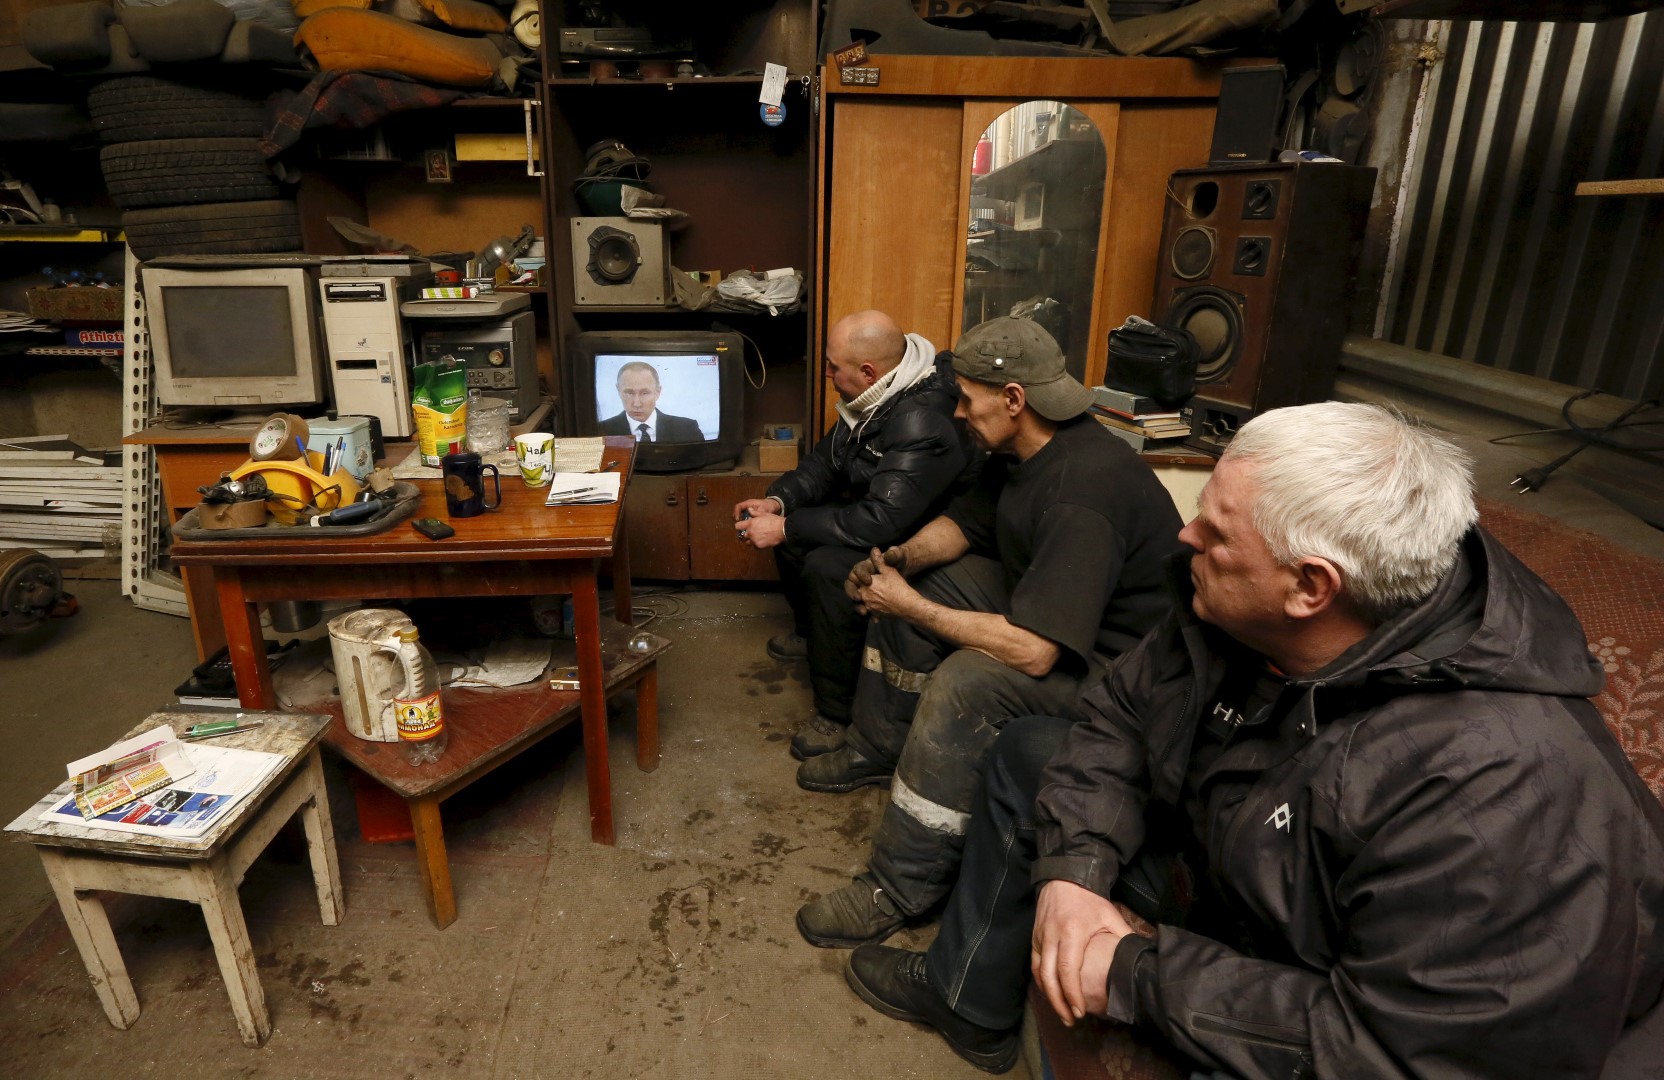 Workers watch a television broadcast of Russian President Vladimir Putin address to the Federal Assembly at an auto repair shop in the Siberian town of Divnogorsk near Krasnoyarsk, Russia, December 3, 2015. Putin used his annual state of the nation speech on Thursday to warn Turkey the Kremlin planned to adopt further sanctions against it to punish Ankara for shooting down a Russian warplane near the Syrian-Turkish border last week. REUTERS/Ilya Naymushin - GF20000083478